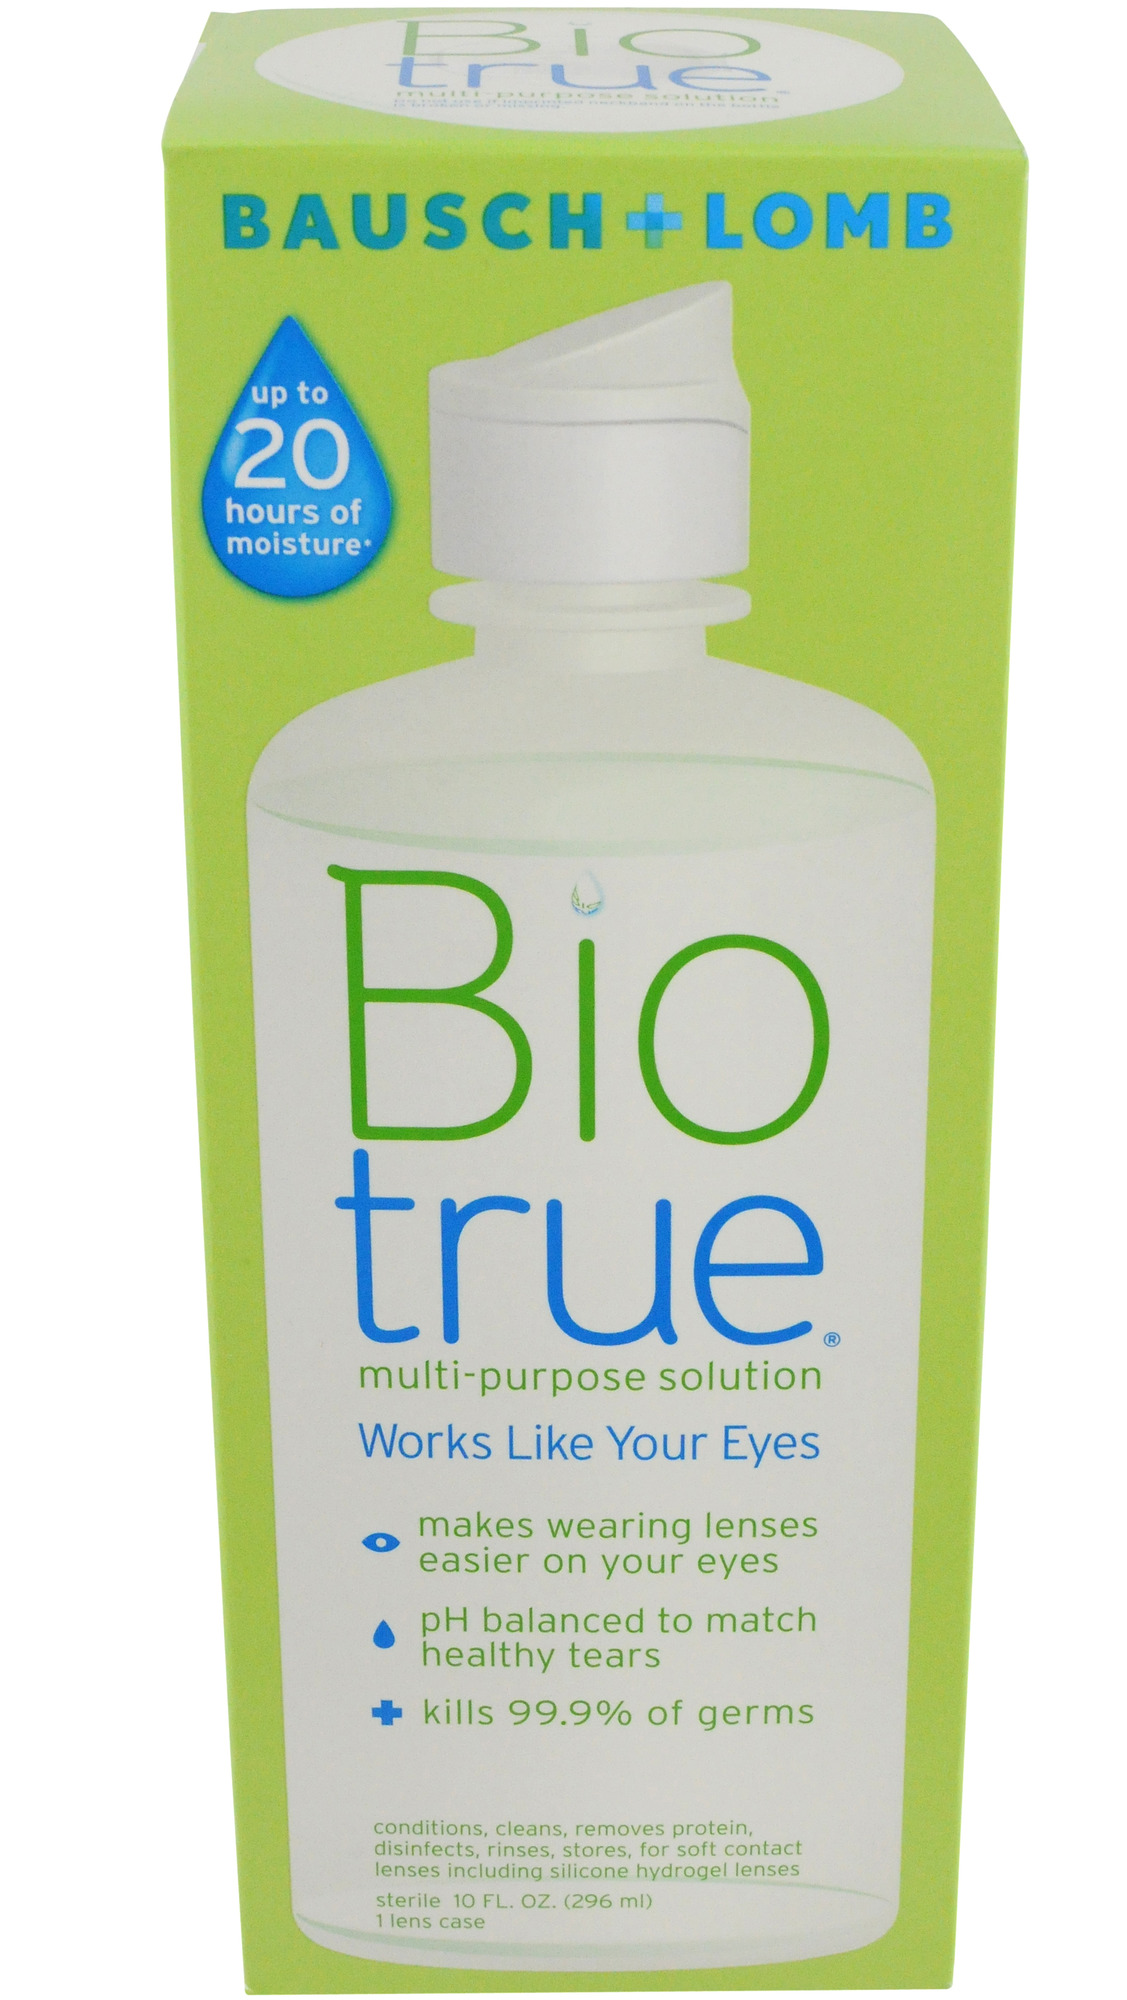 bausch-and-lomb-biotrue-multi-purpose-solution-for-soft-contact-lenses